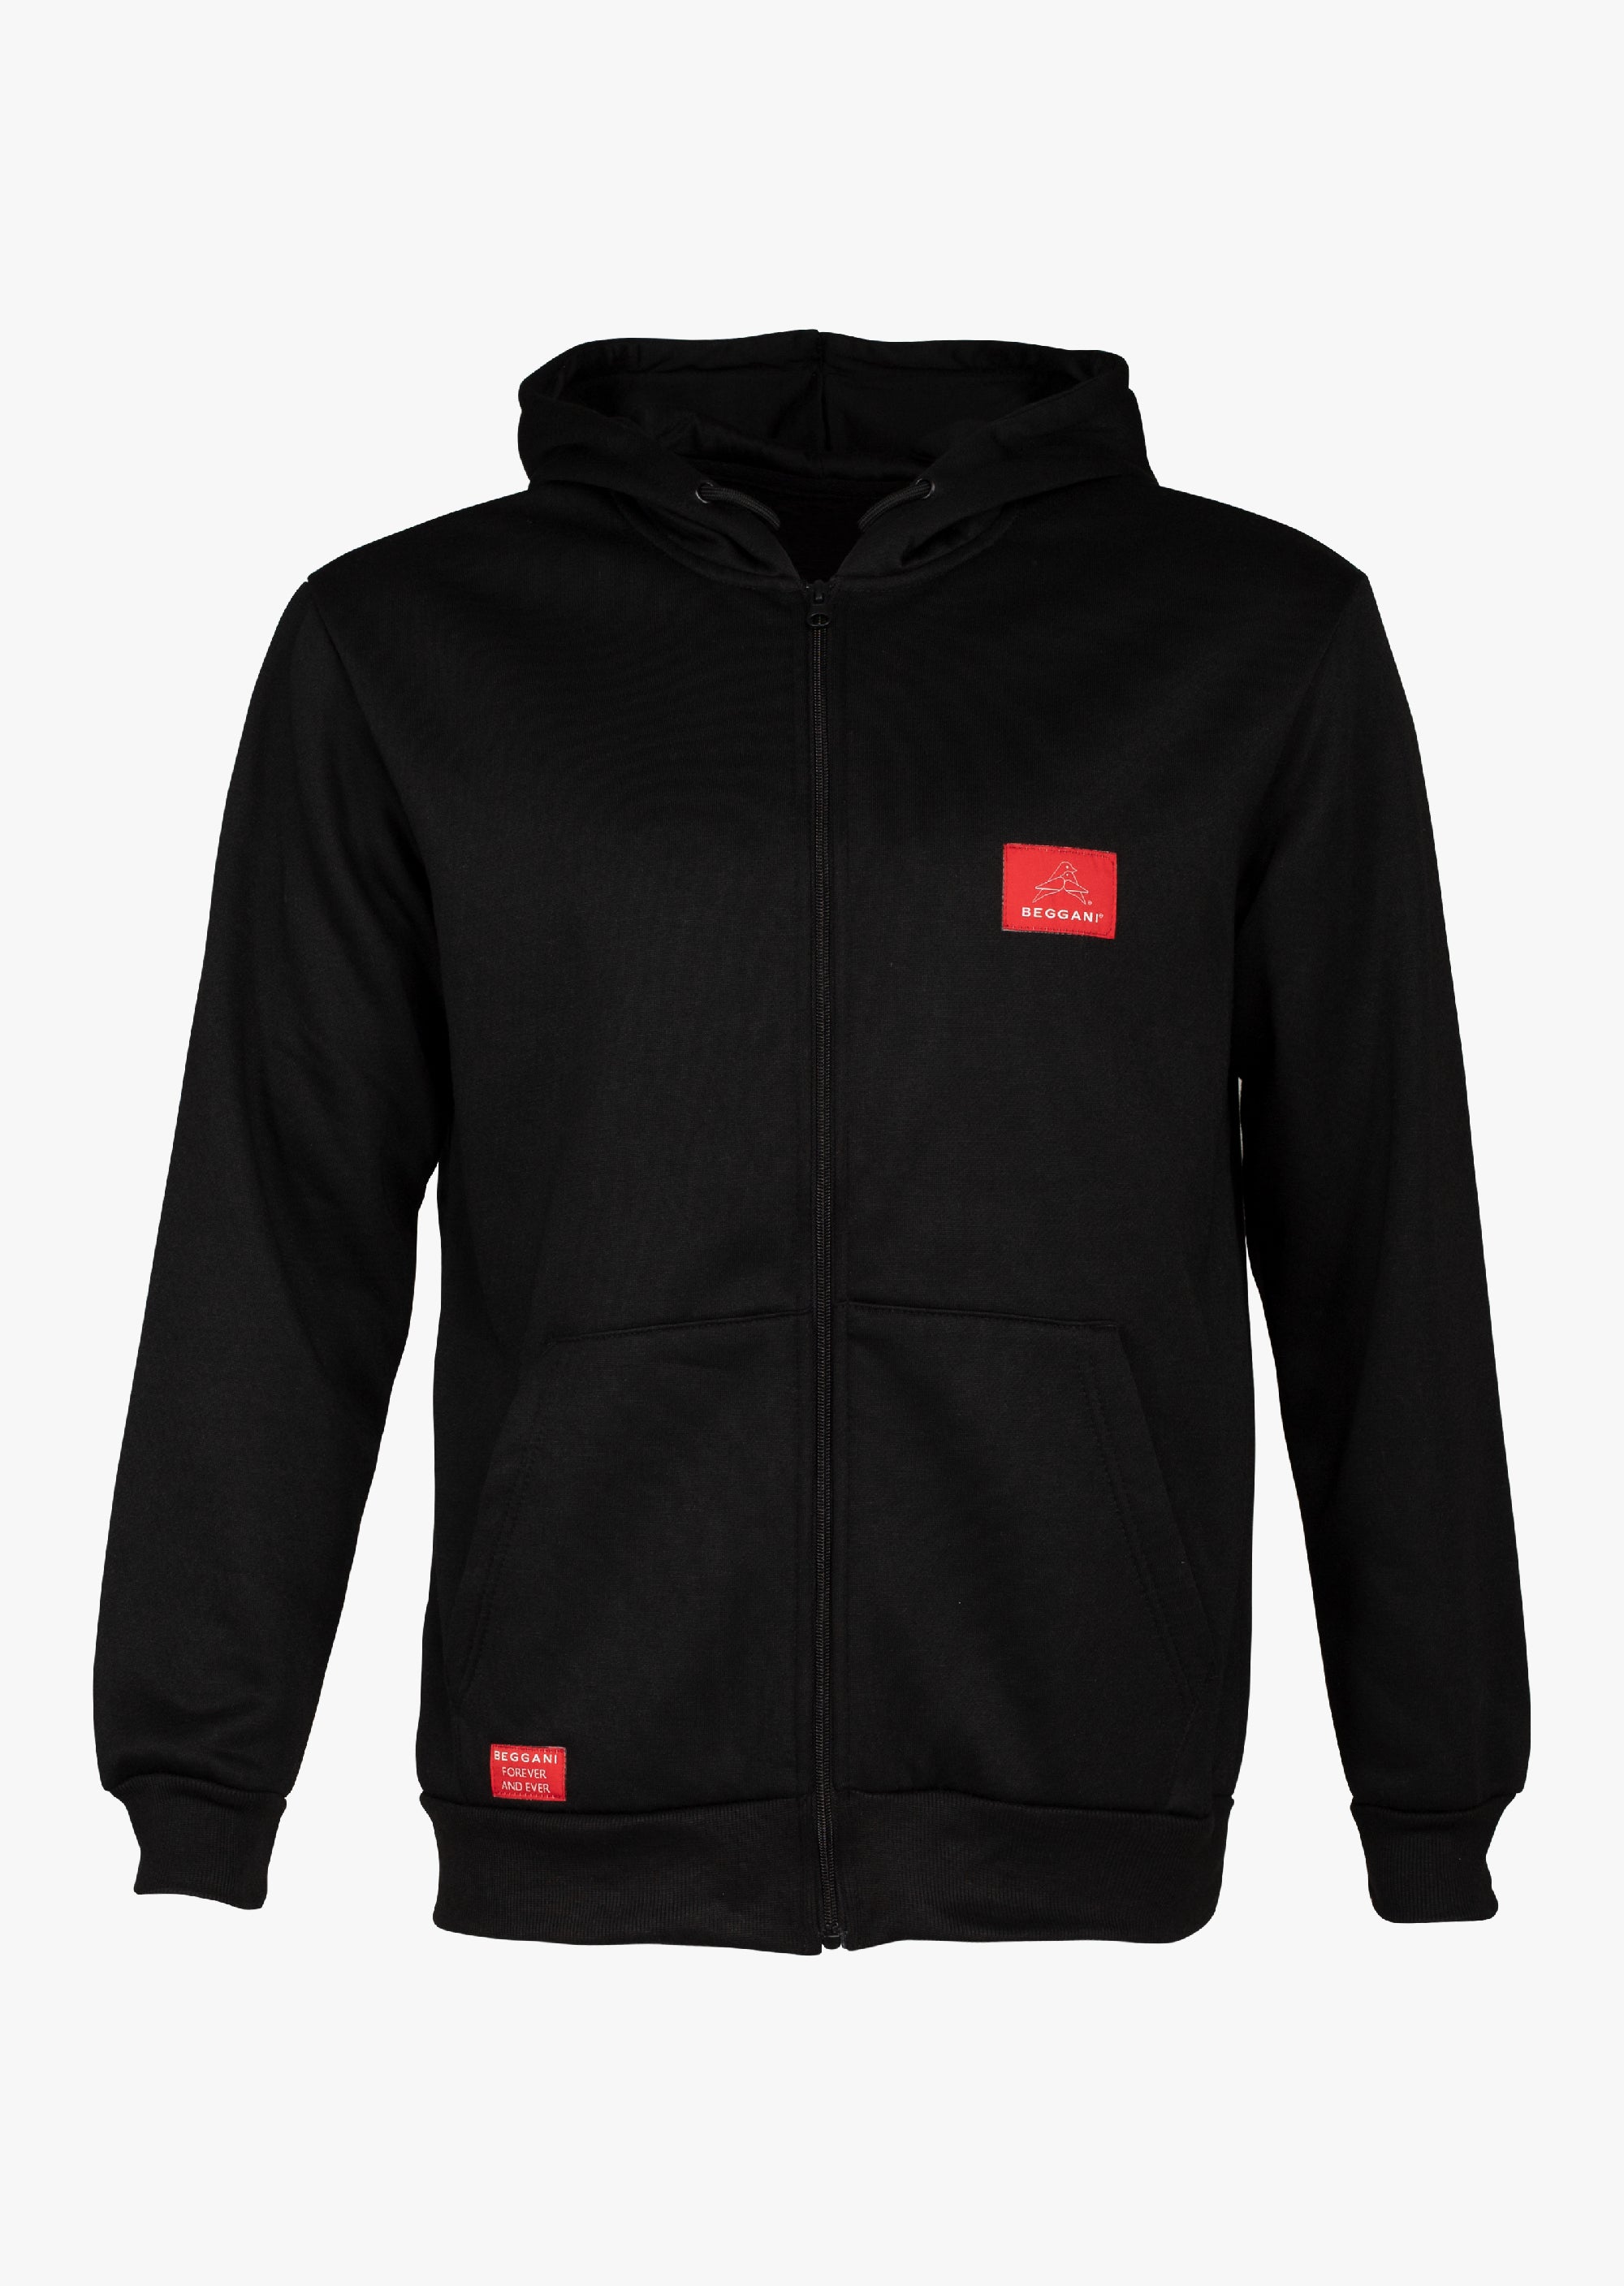 Loose-fitting hoodie made of soft cotton with logo BEGGANI